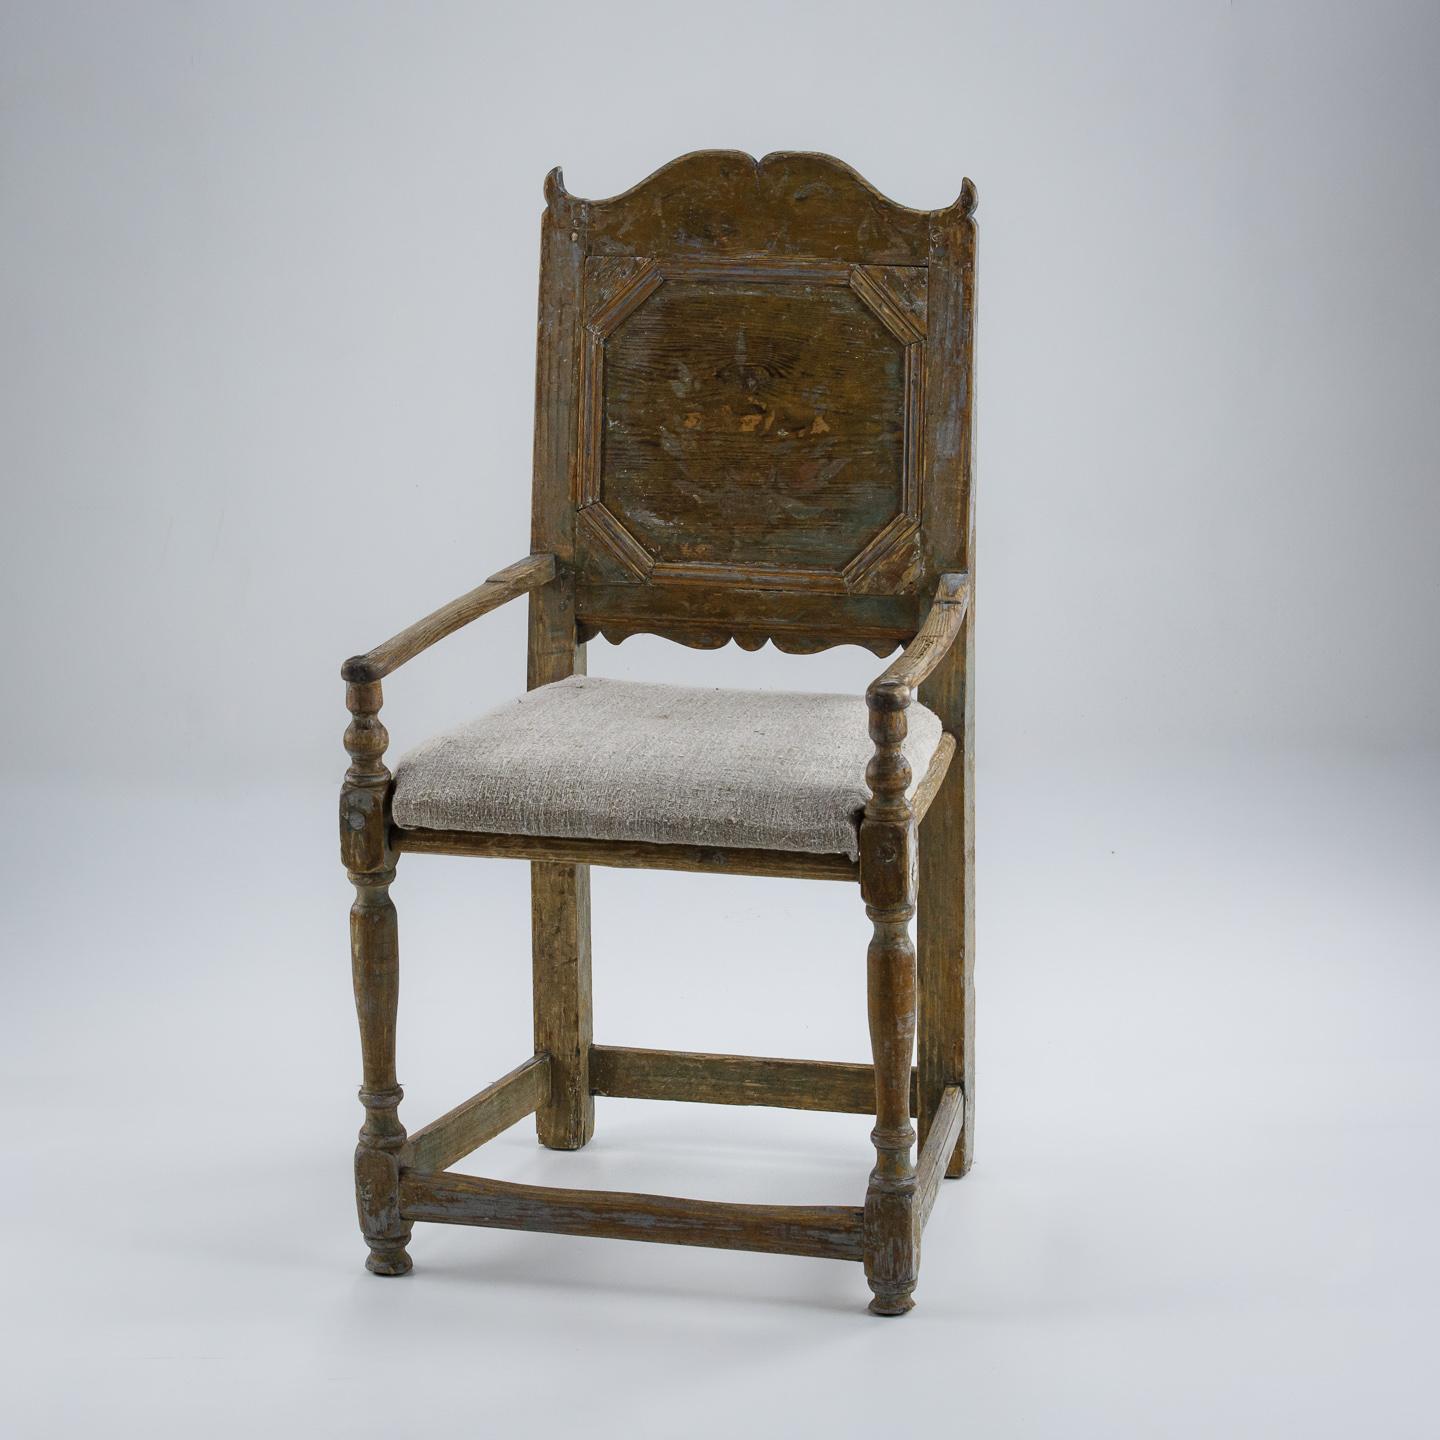 Provincial Armchair in original, worn blue painted finish. Sweden Circa 1800. Seat Height 47cm.